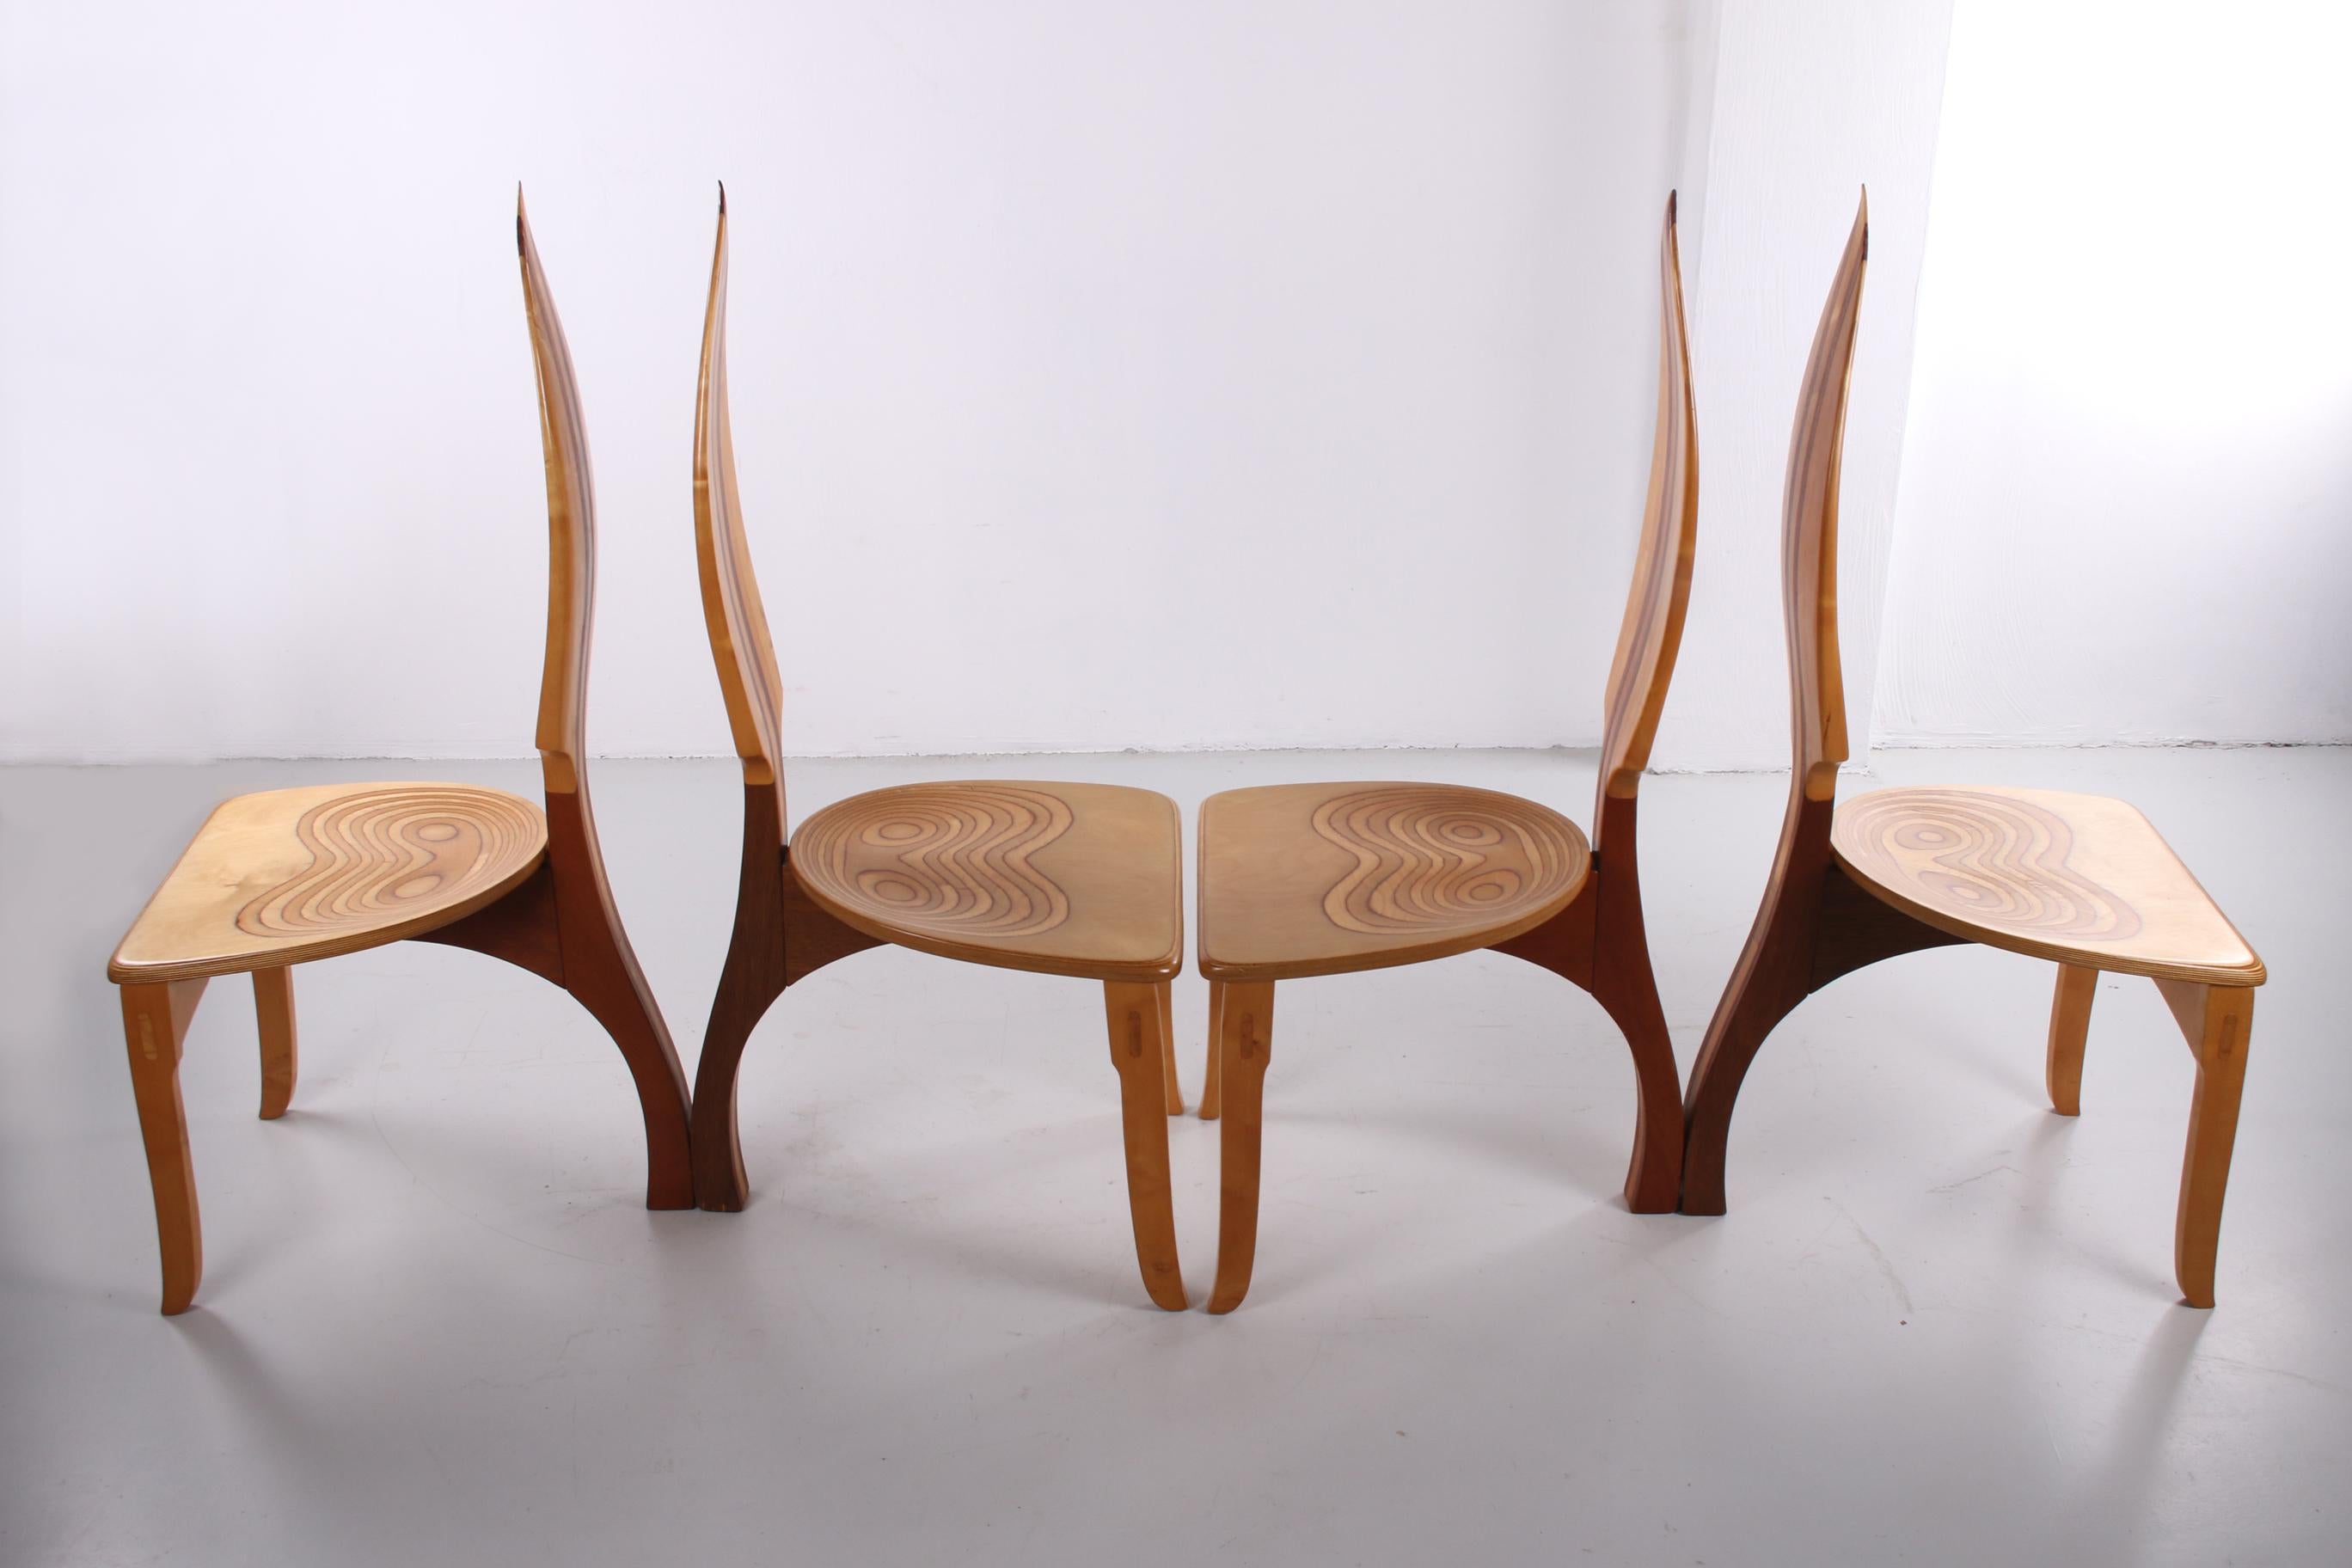 Expressionist Set of 4 David Haig Dining Table Chairs Made of Beech Wood Model Vedder, 70s